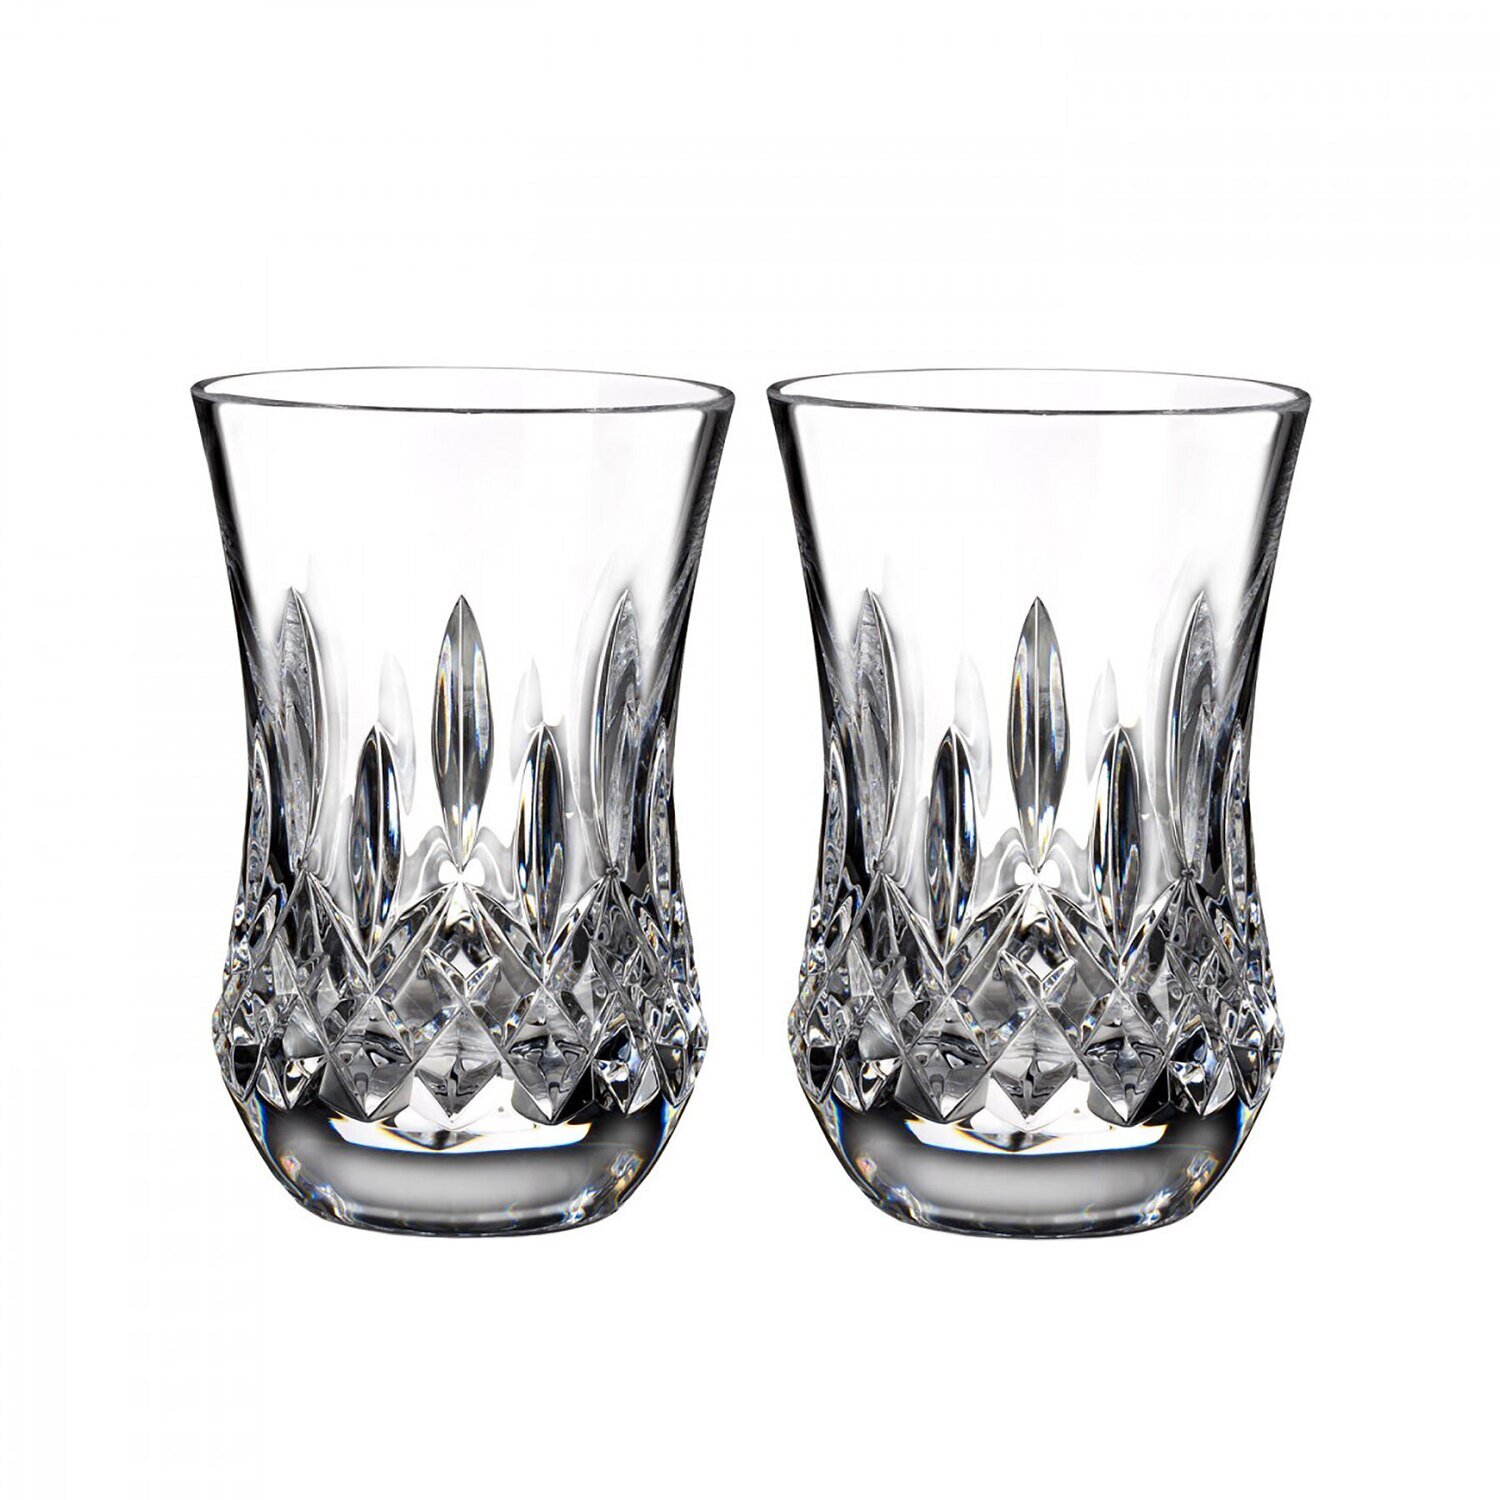 Waterford Lismore Connoisseur Sipping Tumbler Flared 6 Oz Set of 2 40003435